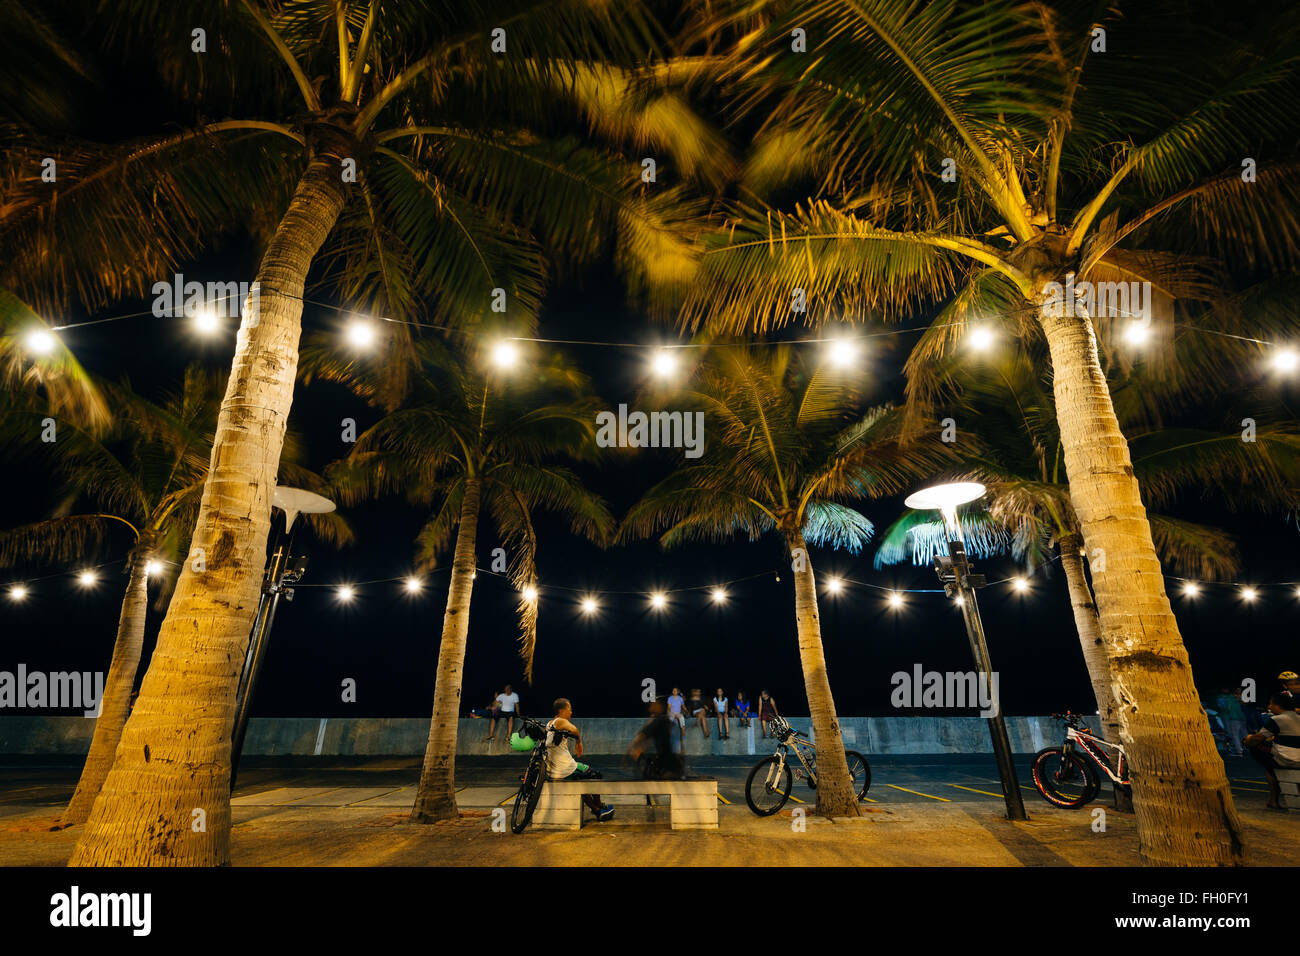 Palm trees at night, in Pasay, Metro Manila, The Philippines. Stock Photo